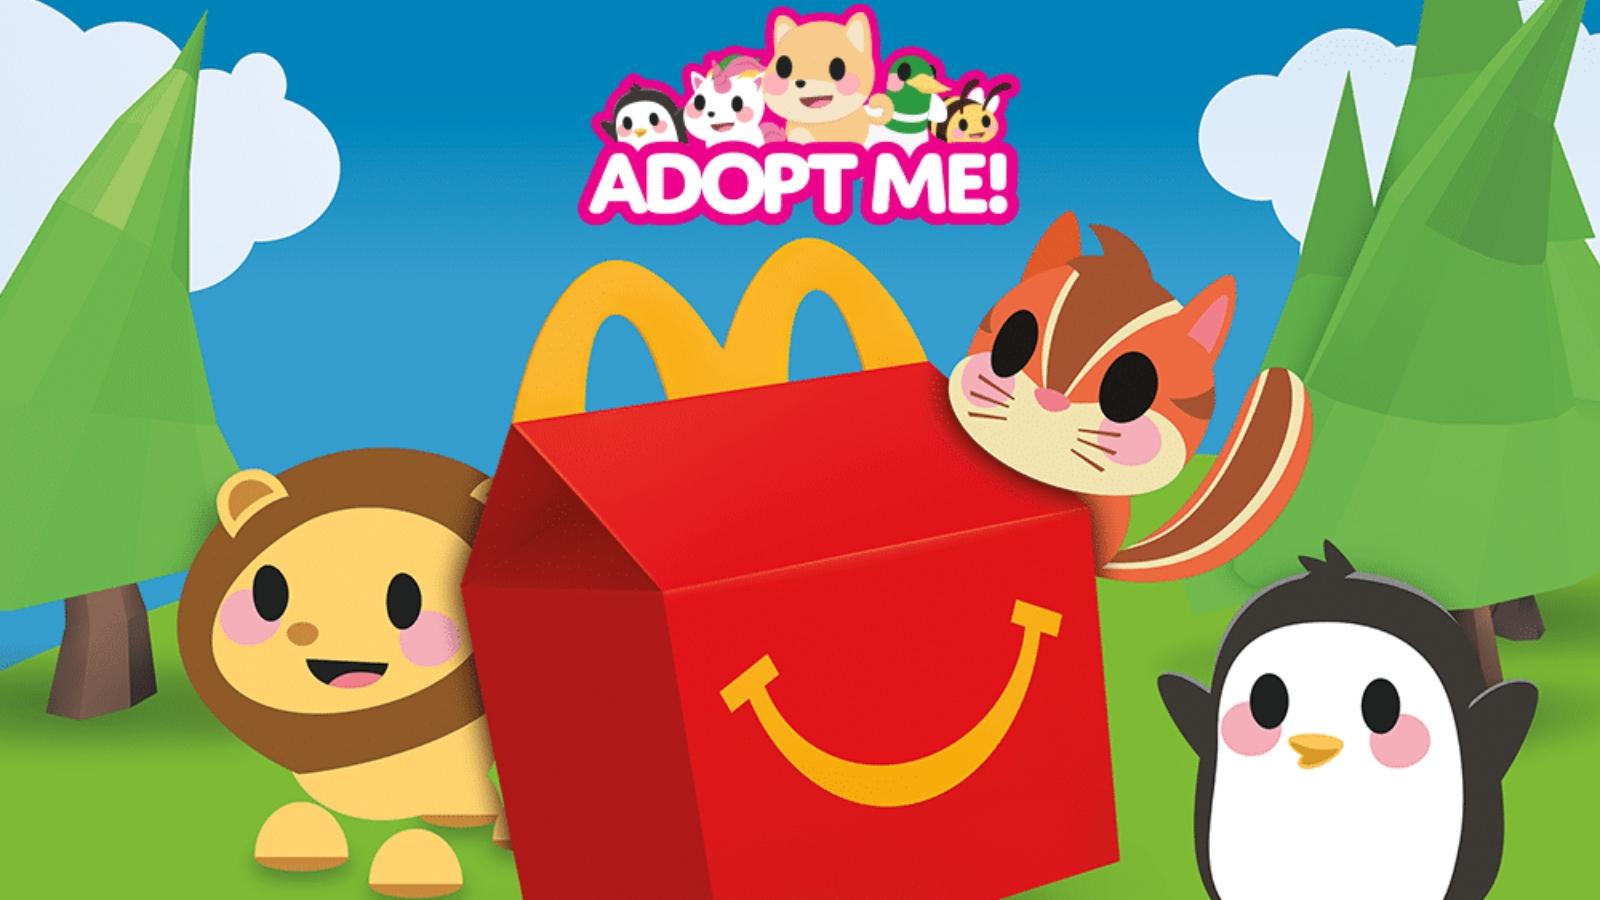 Popular Roblox game 'Adopt Me' gets McDonalds Happy Meal in some